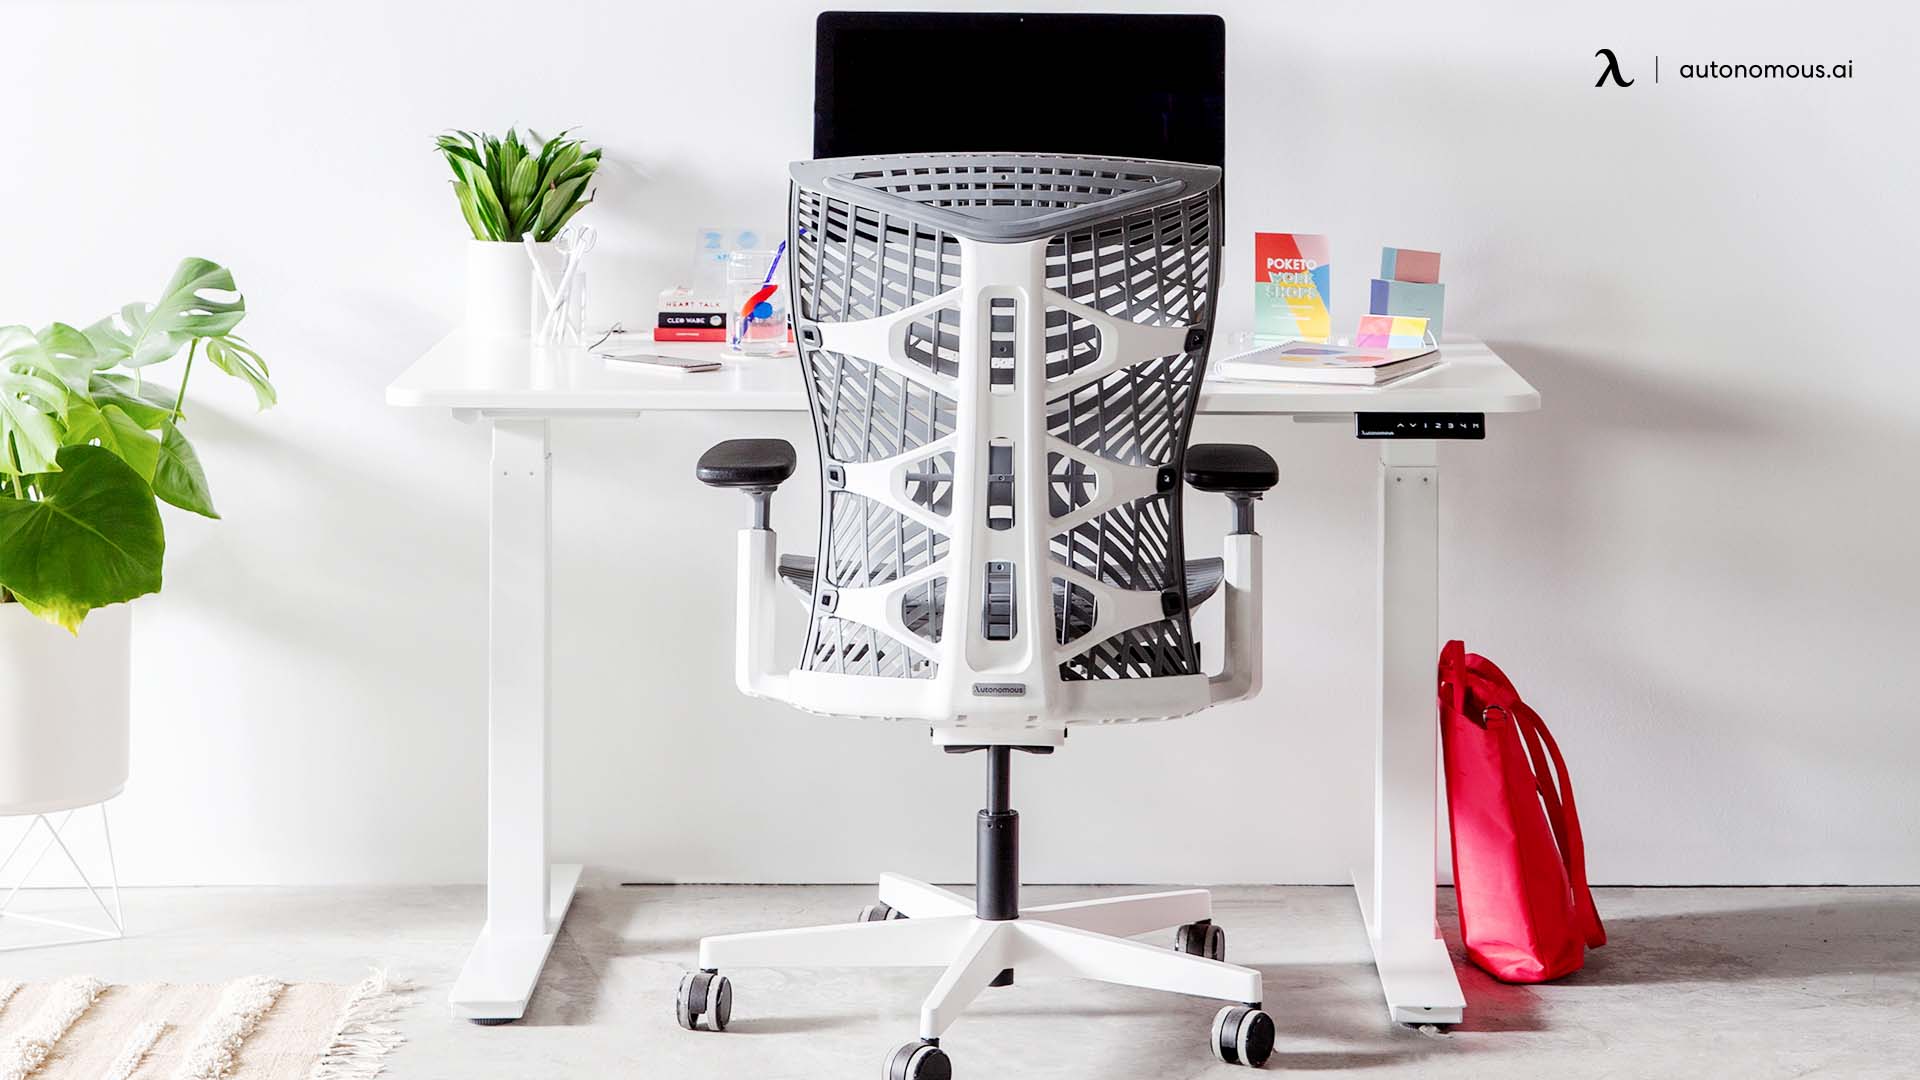 Ergonomic office chair - gadgets for working from home